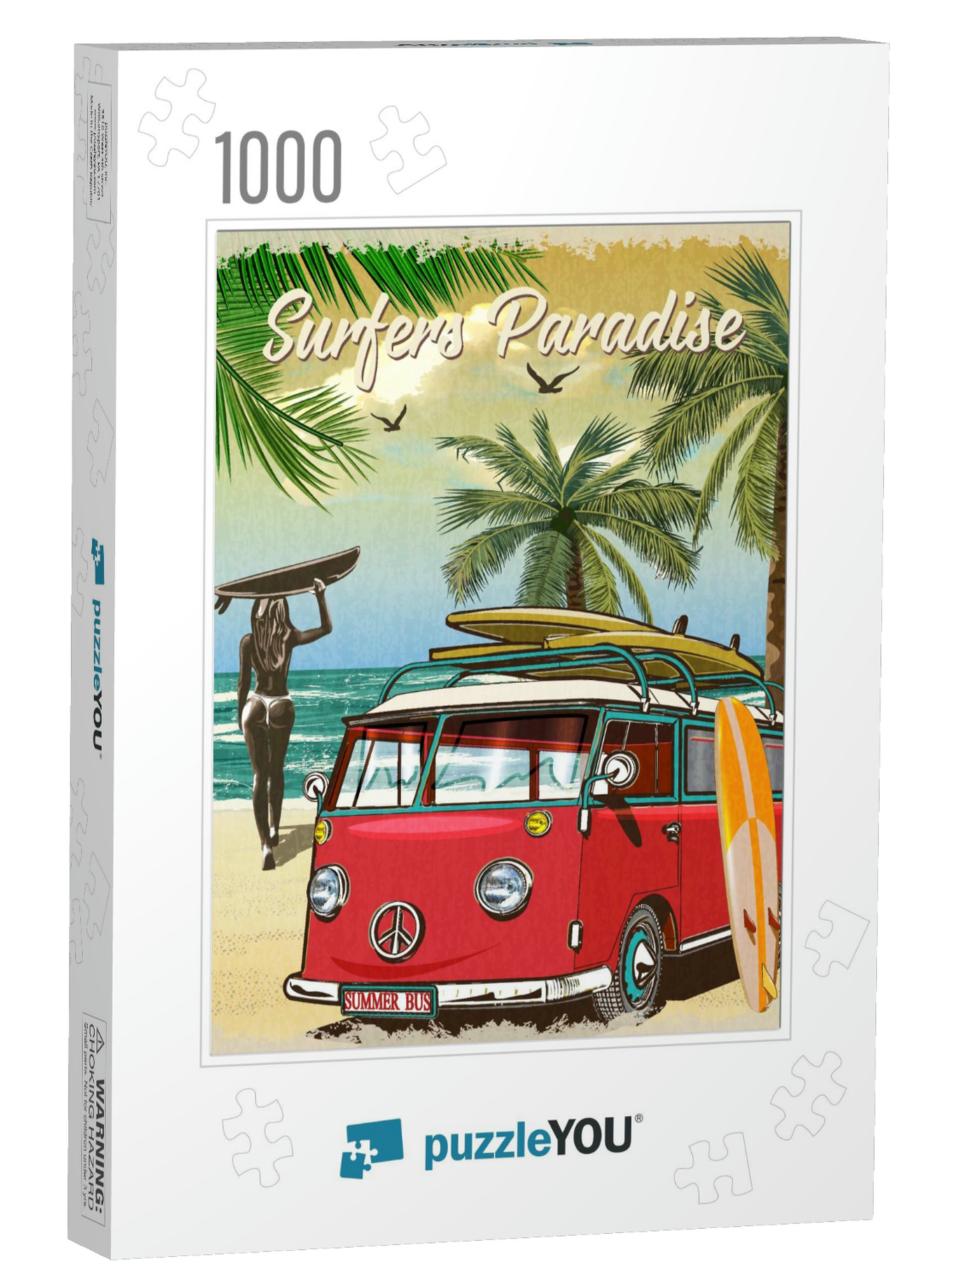 Surf Poster with Retro Bus & Girl Carrying Surfboard... Jigsaw Puzzle with 1000 pieces